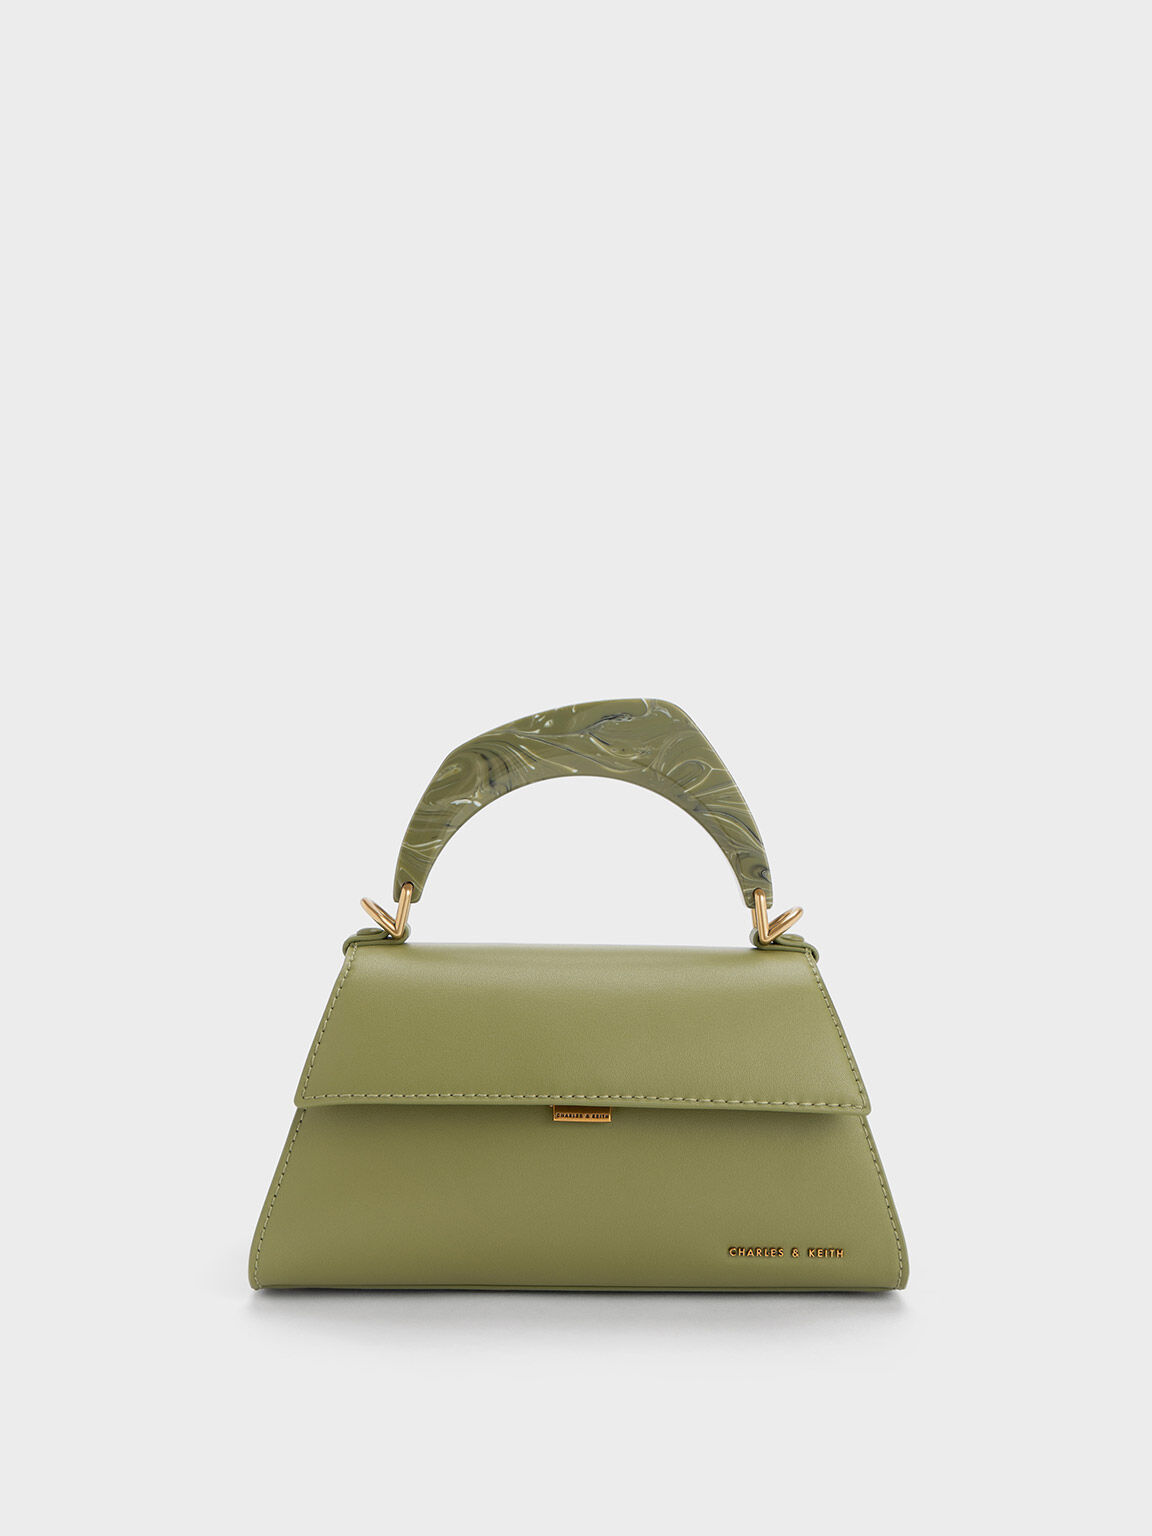 Share more than 154 olive bag